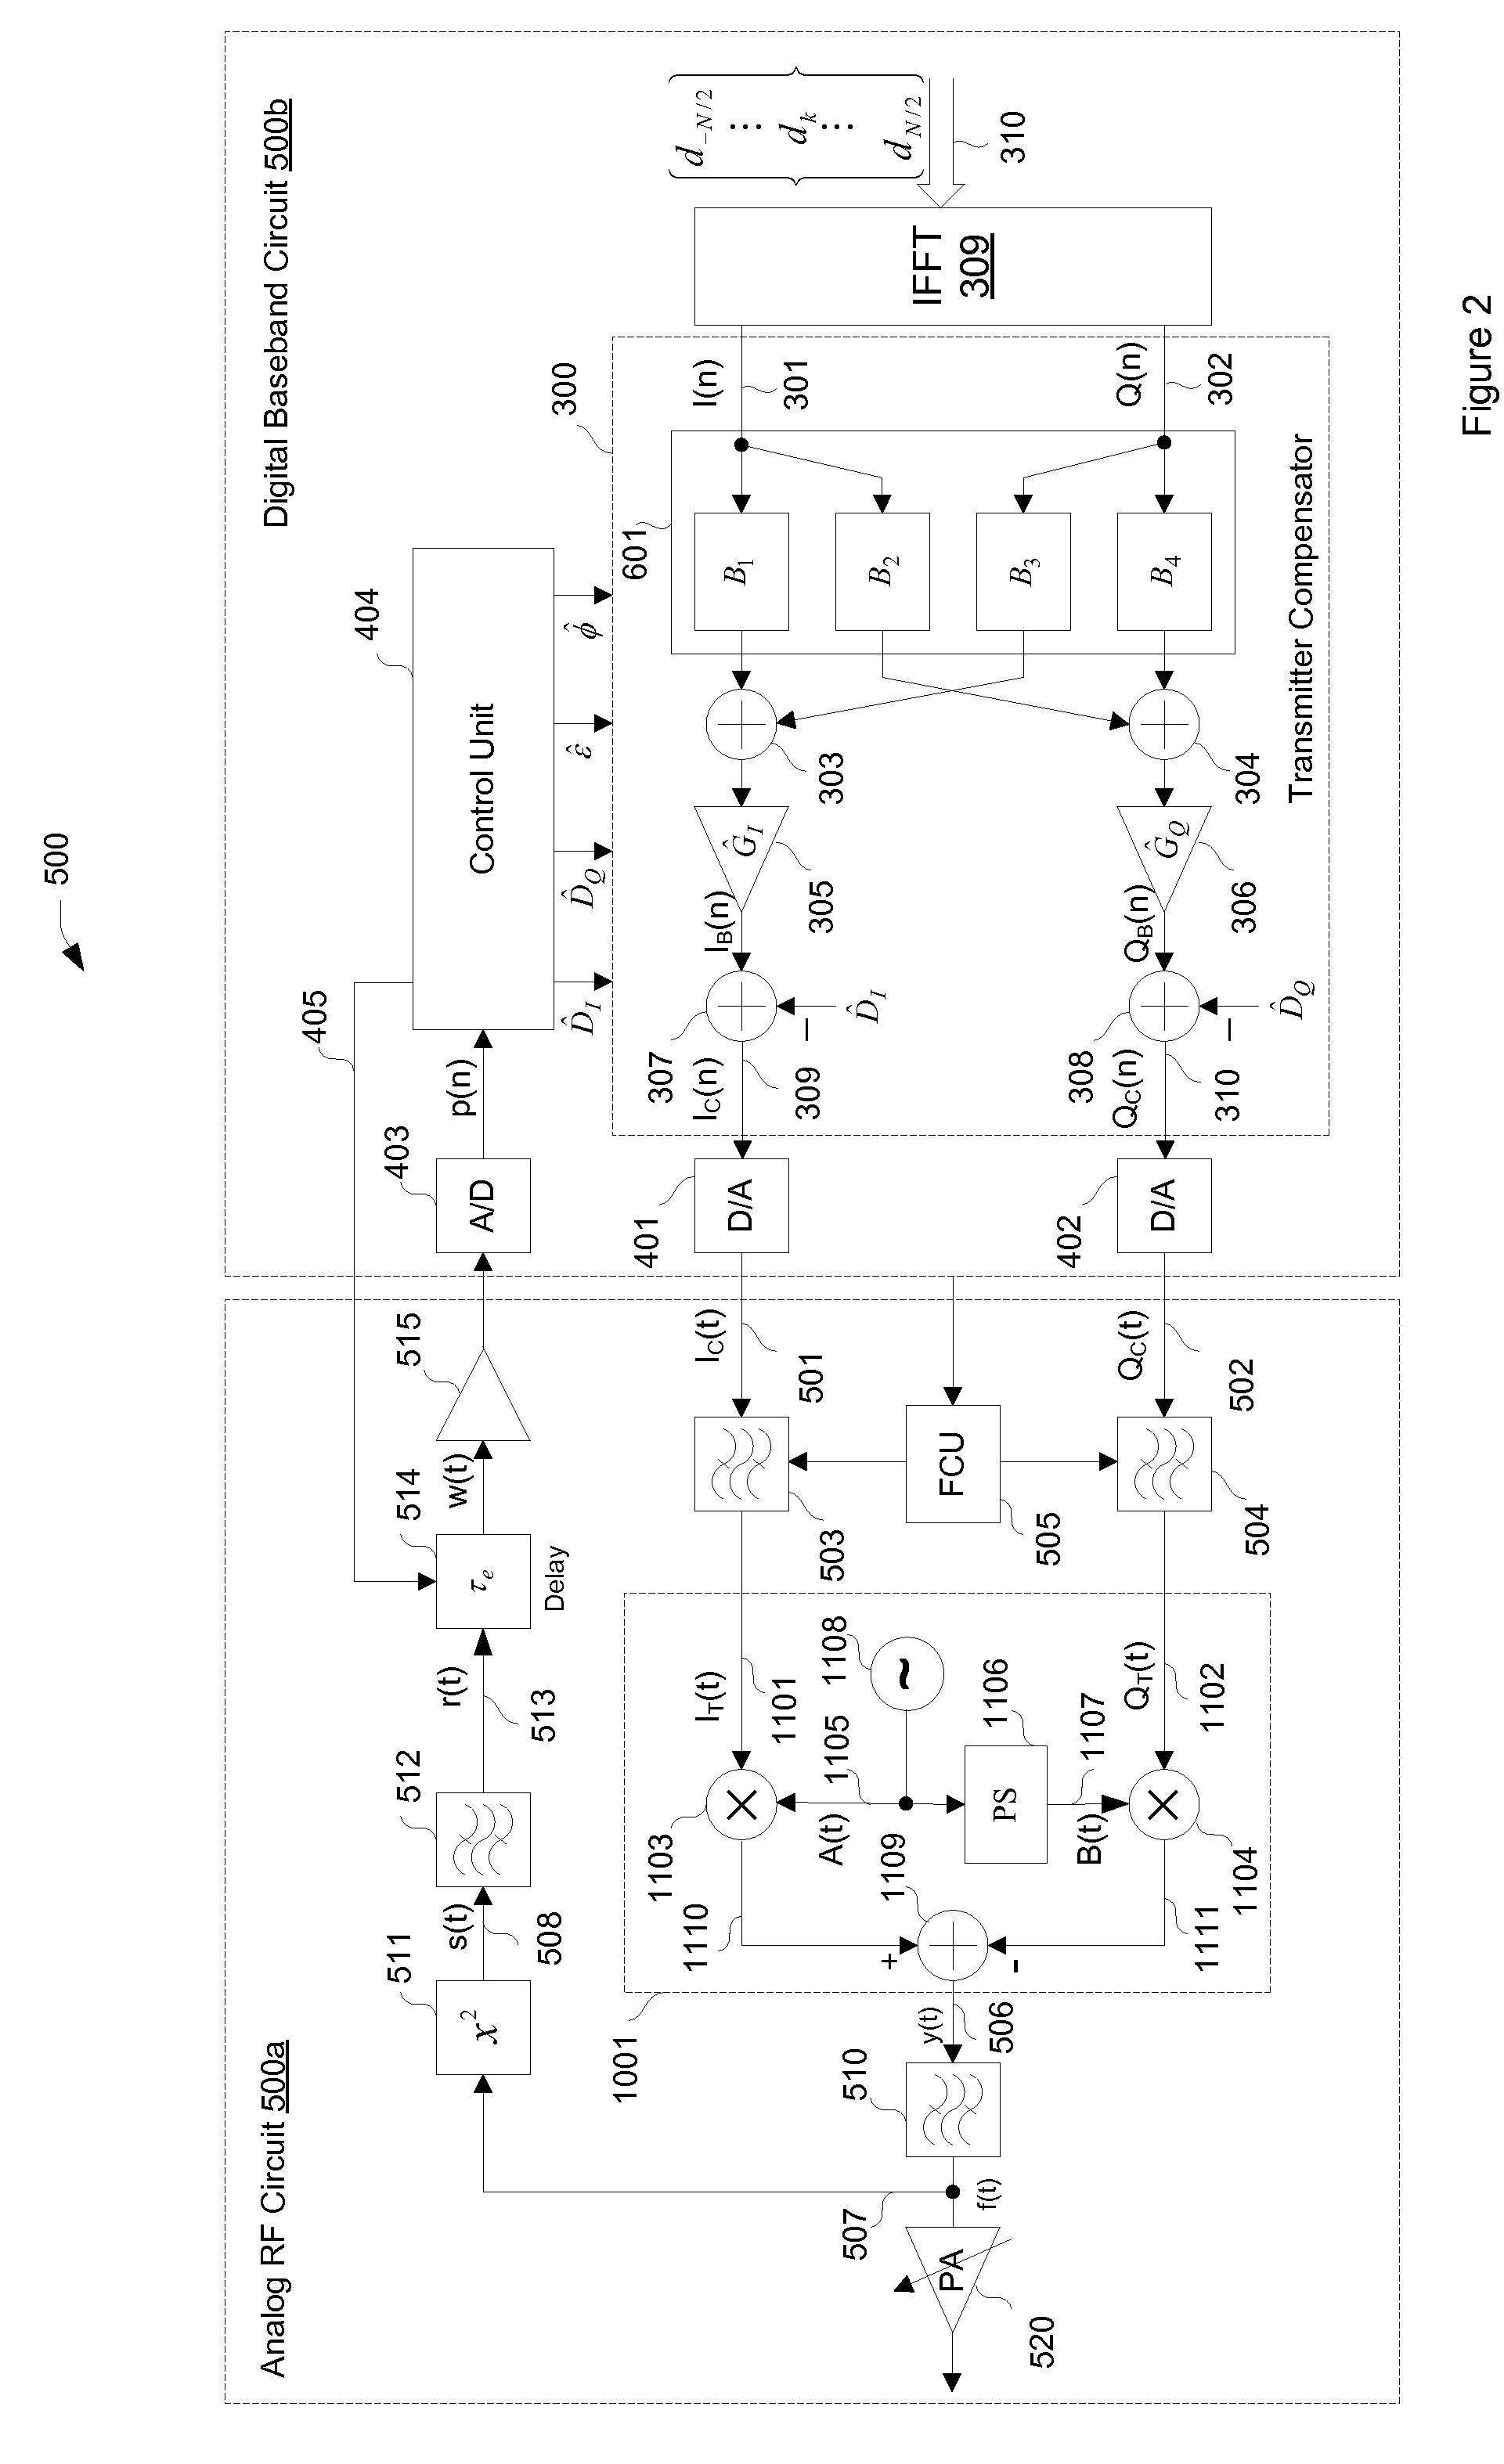 Compensation for gain imbalance, phase imbalance and DC offsets in a transmitter